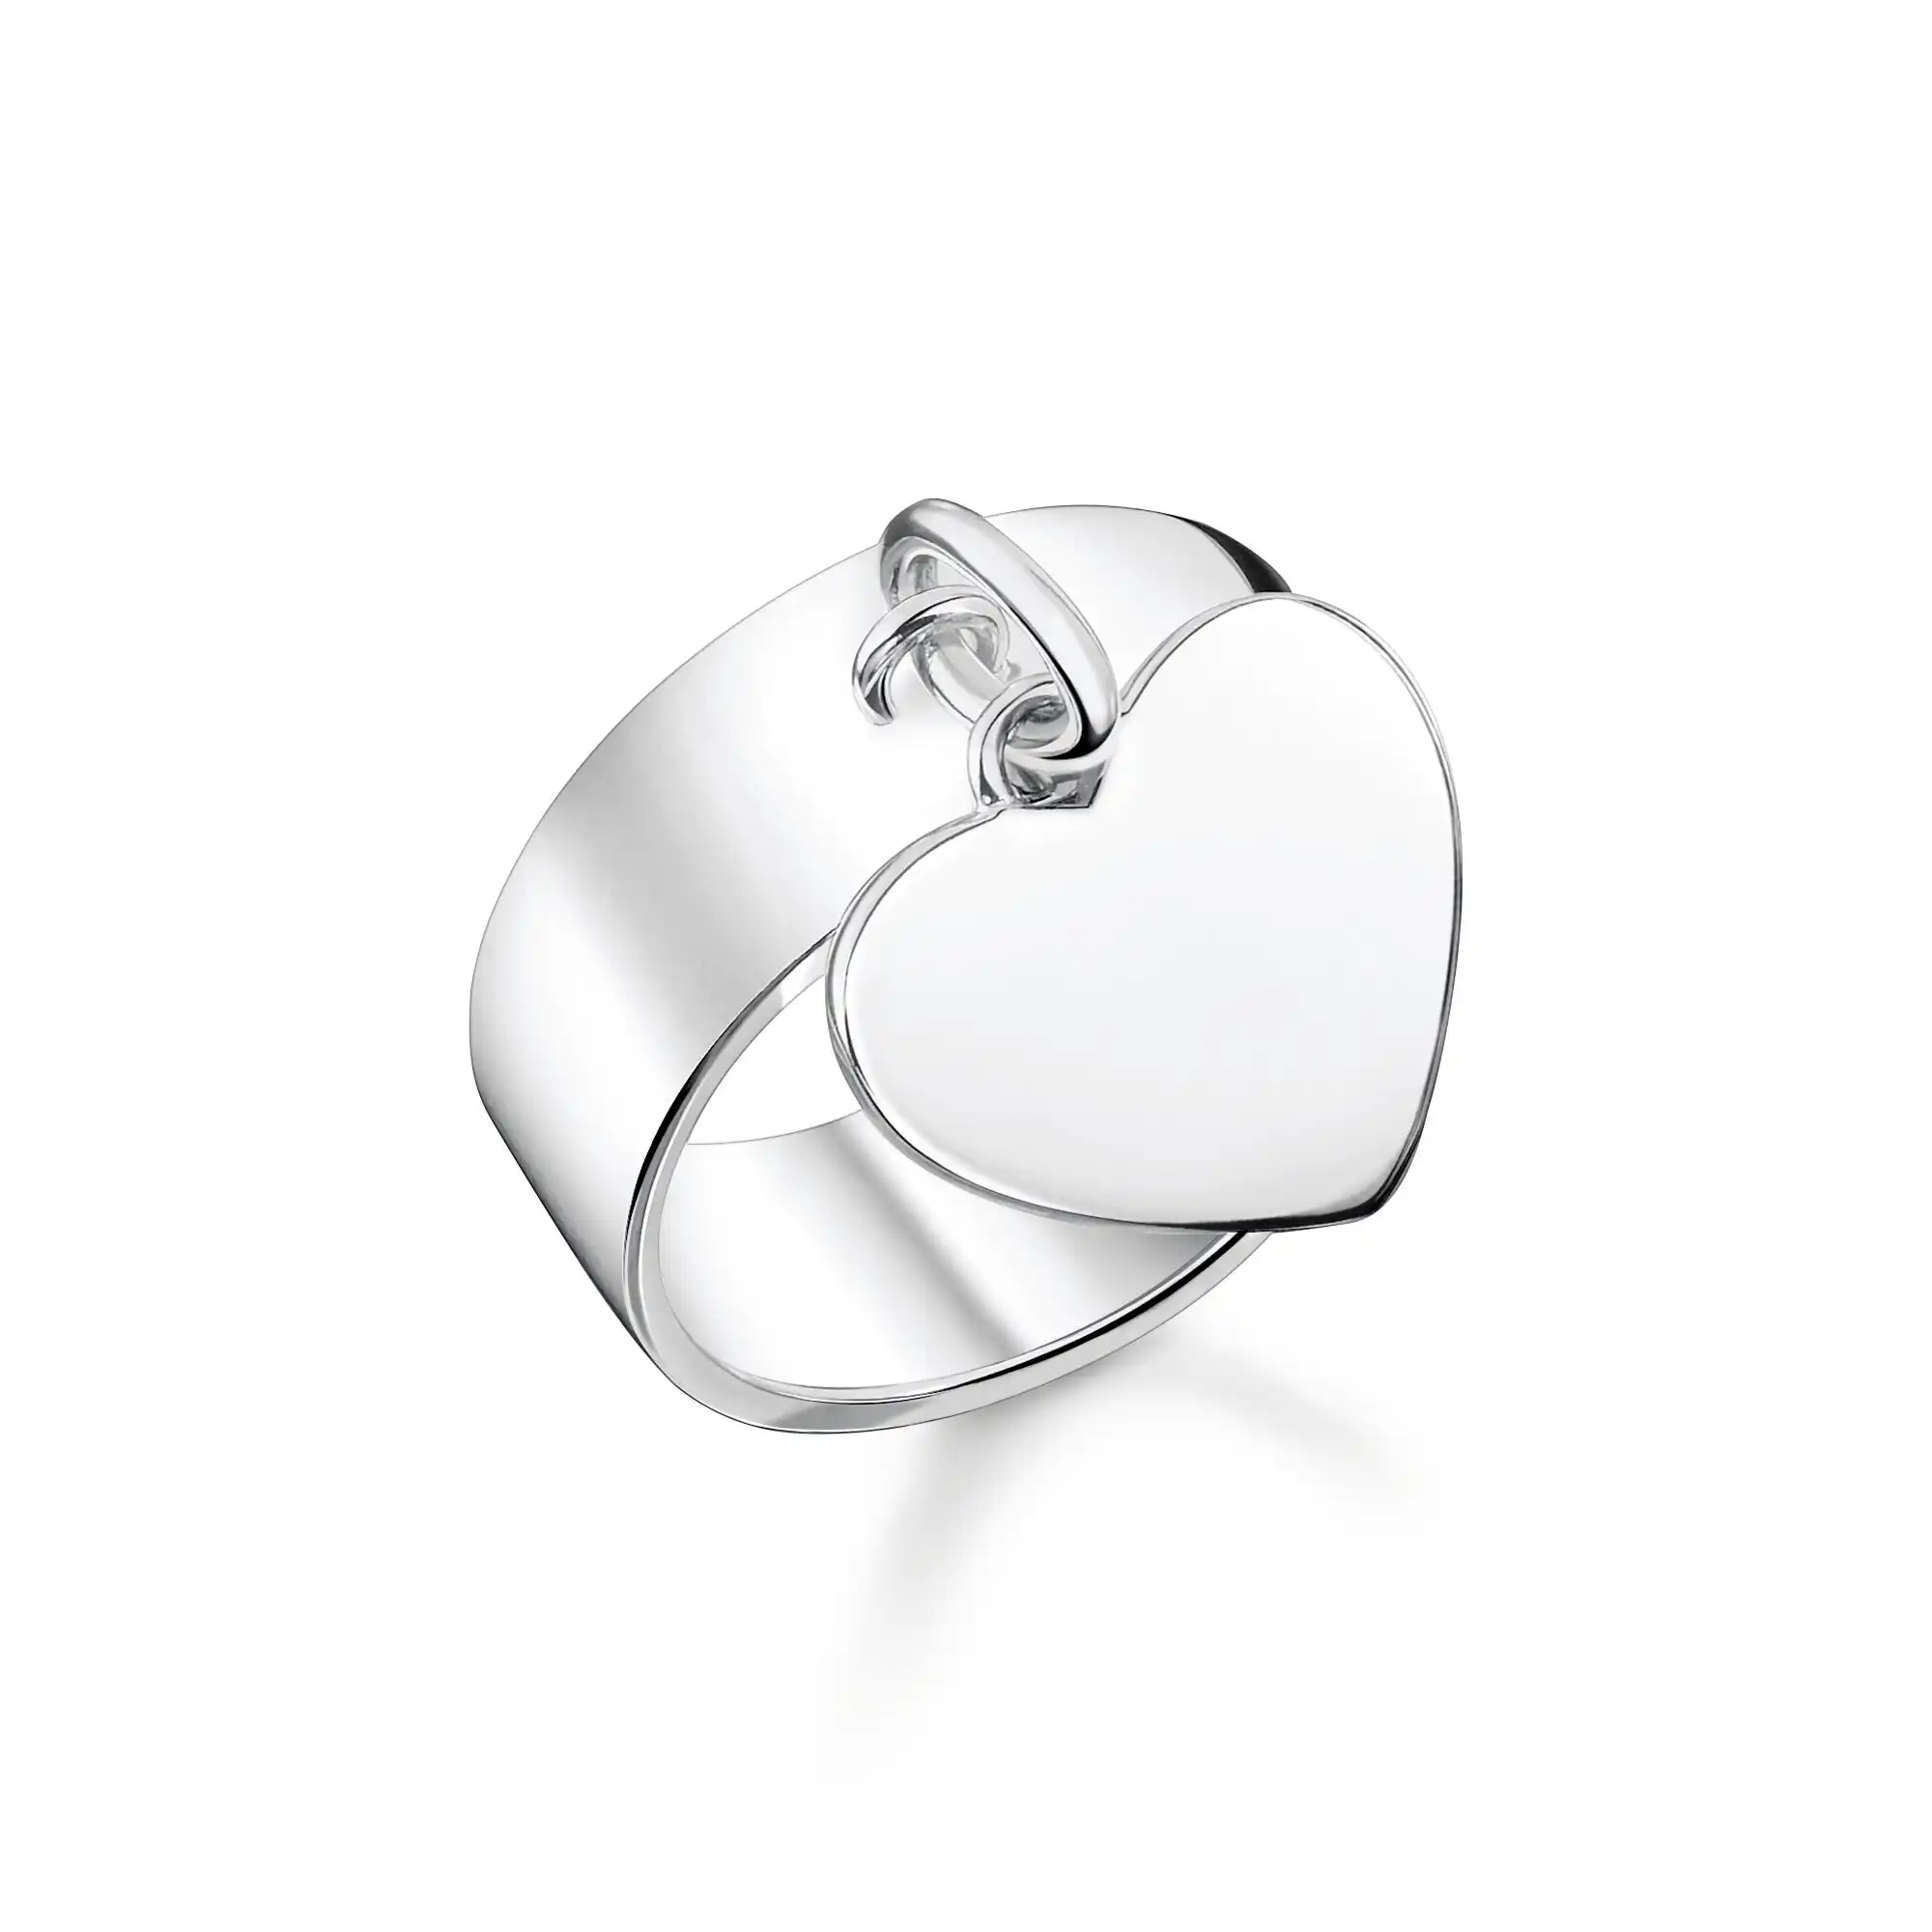 Thomas Sabo Ring With Heart Silver